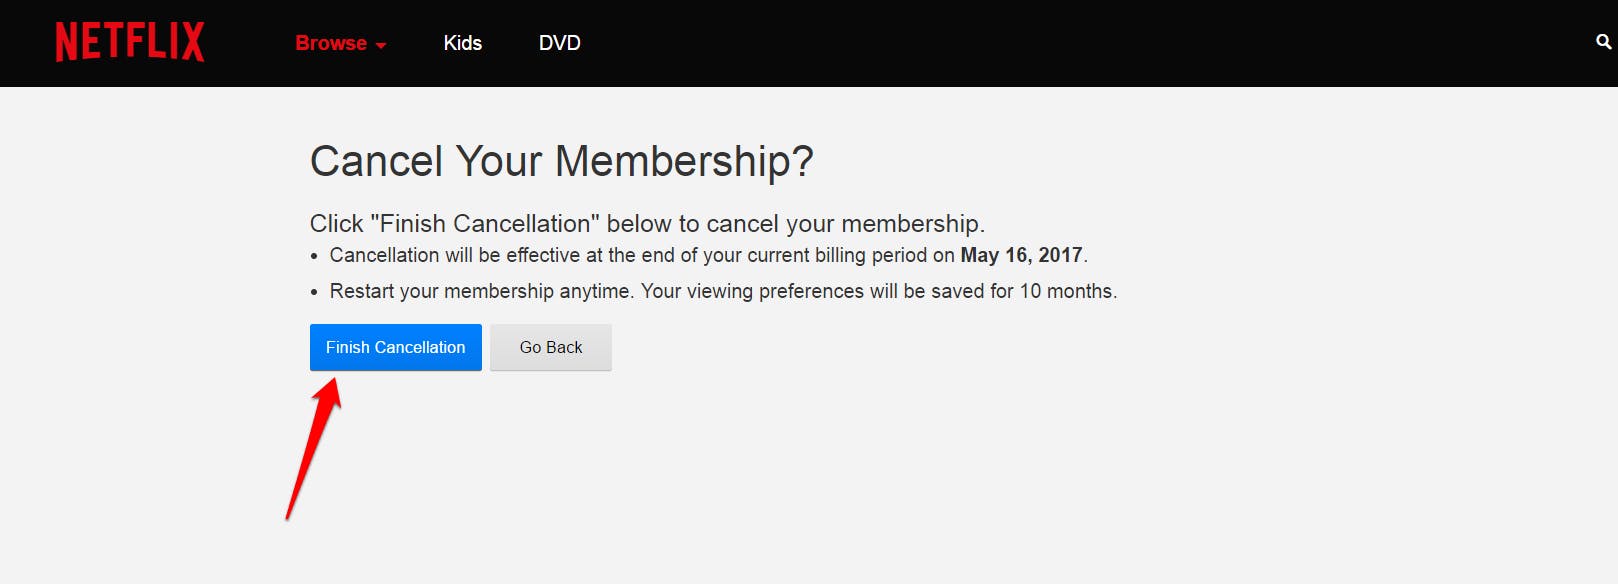 How to cancel your Netflix account